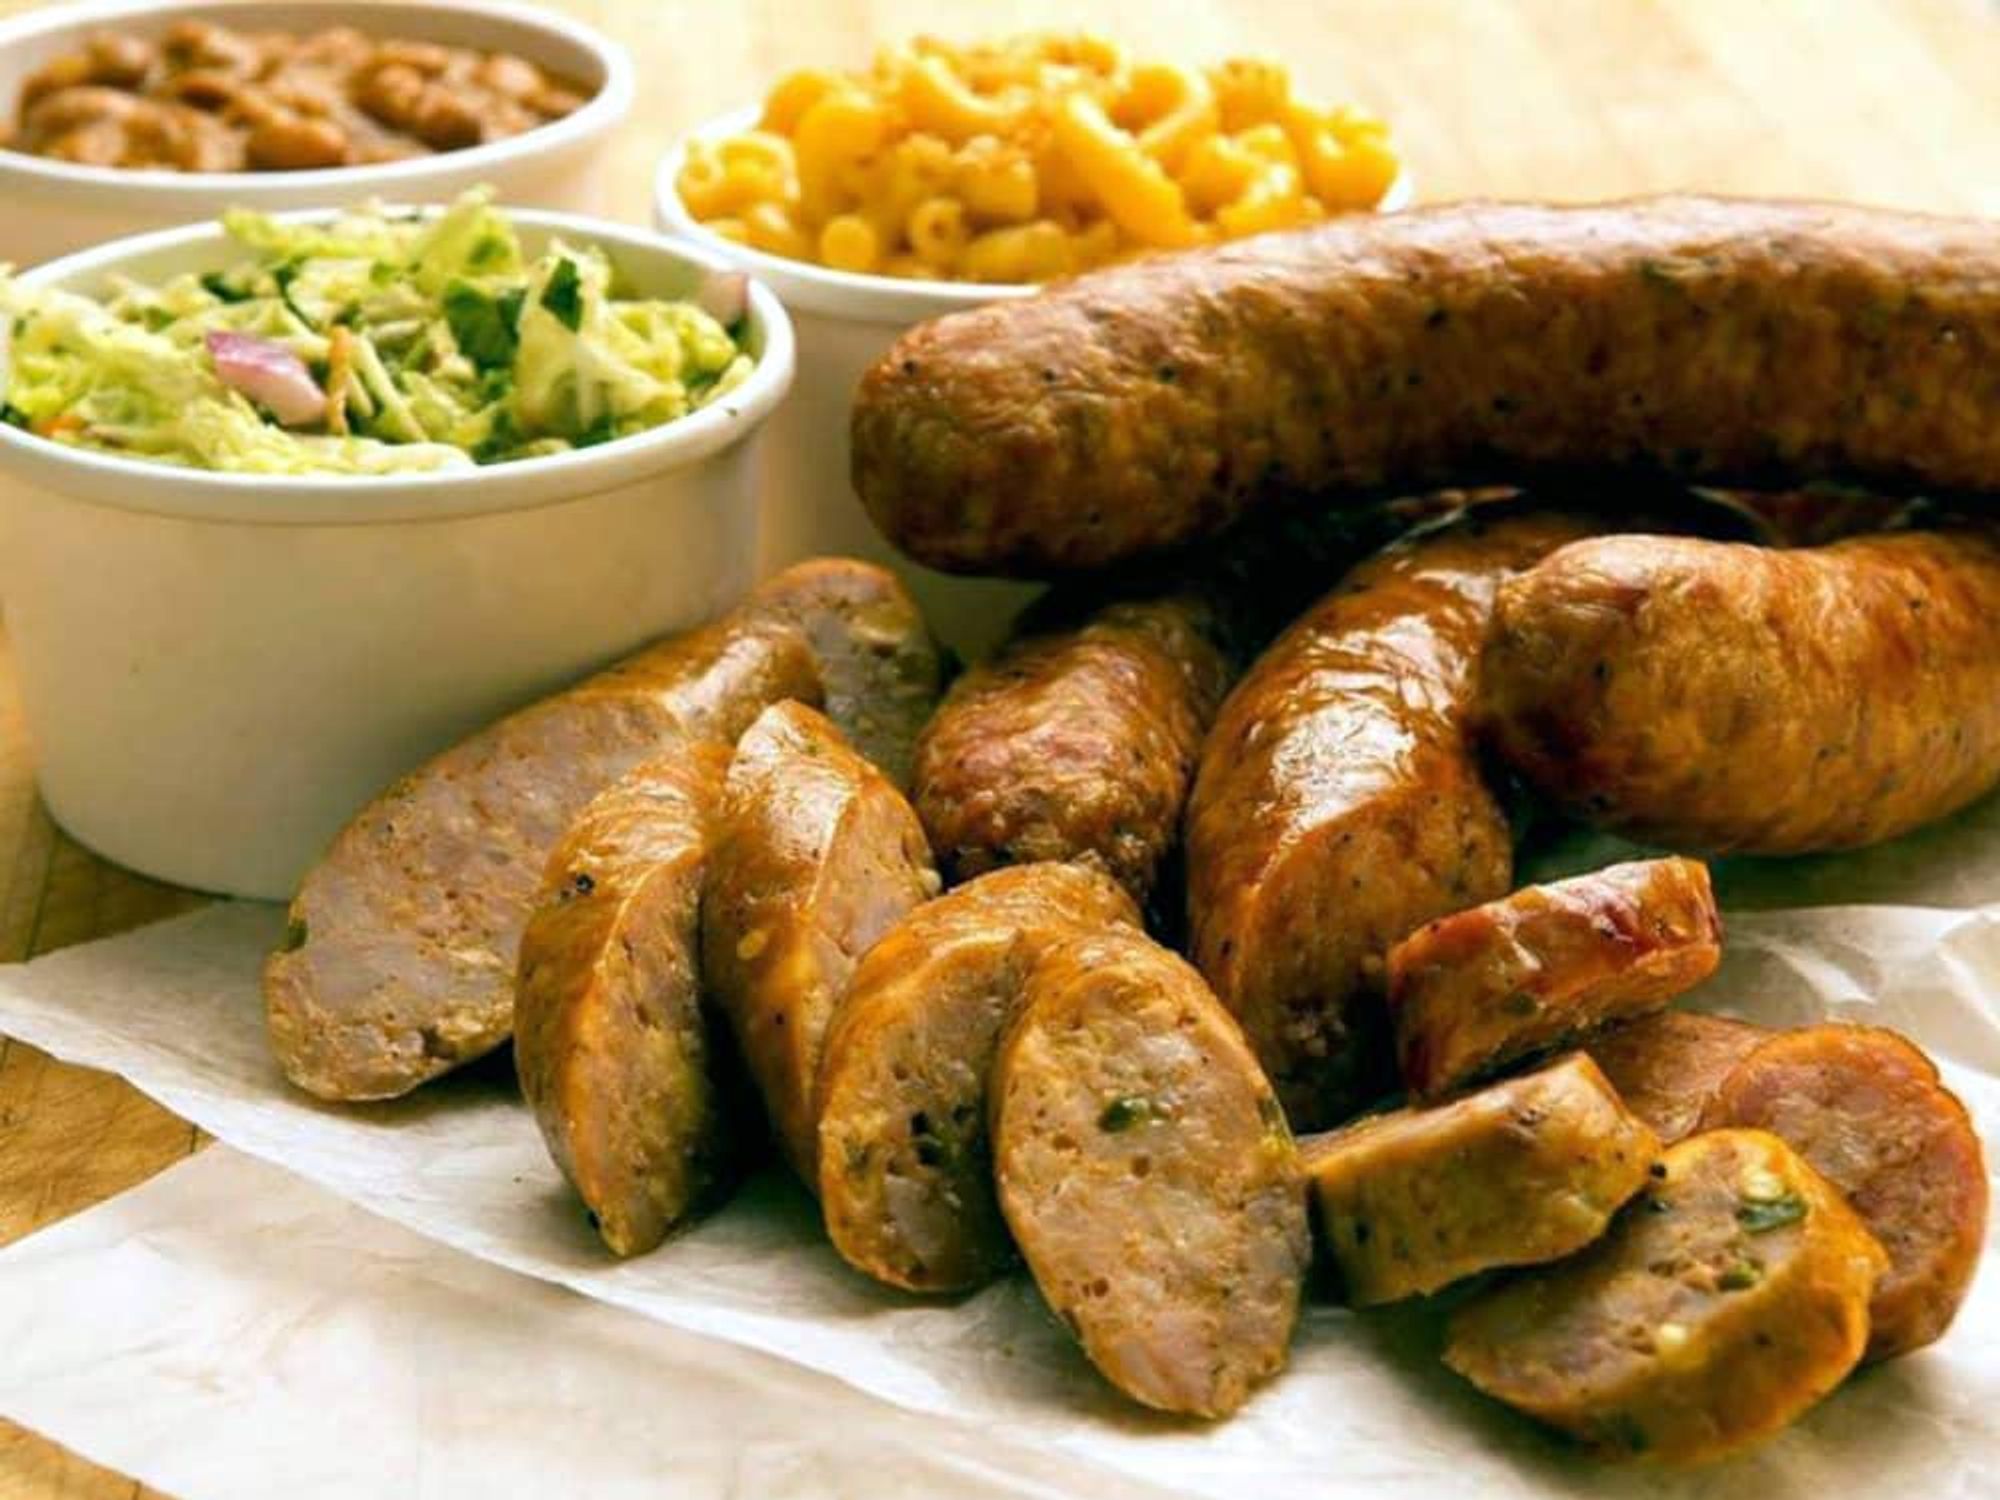 Ten50 BBQ sausage and sides